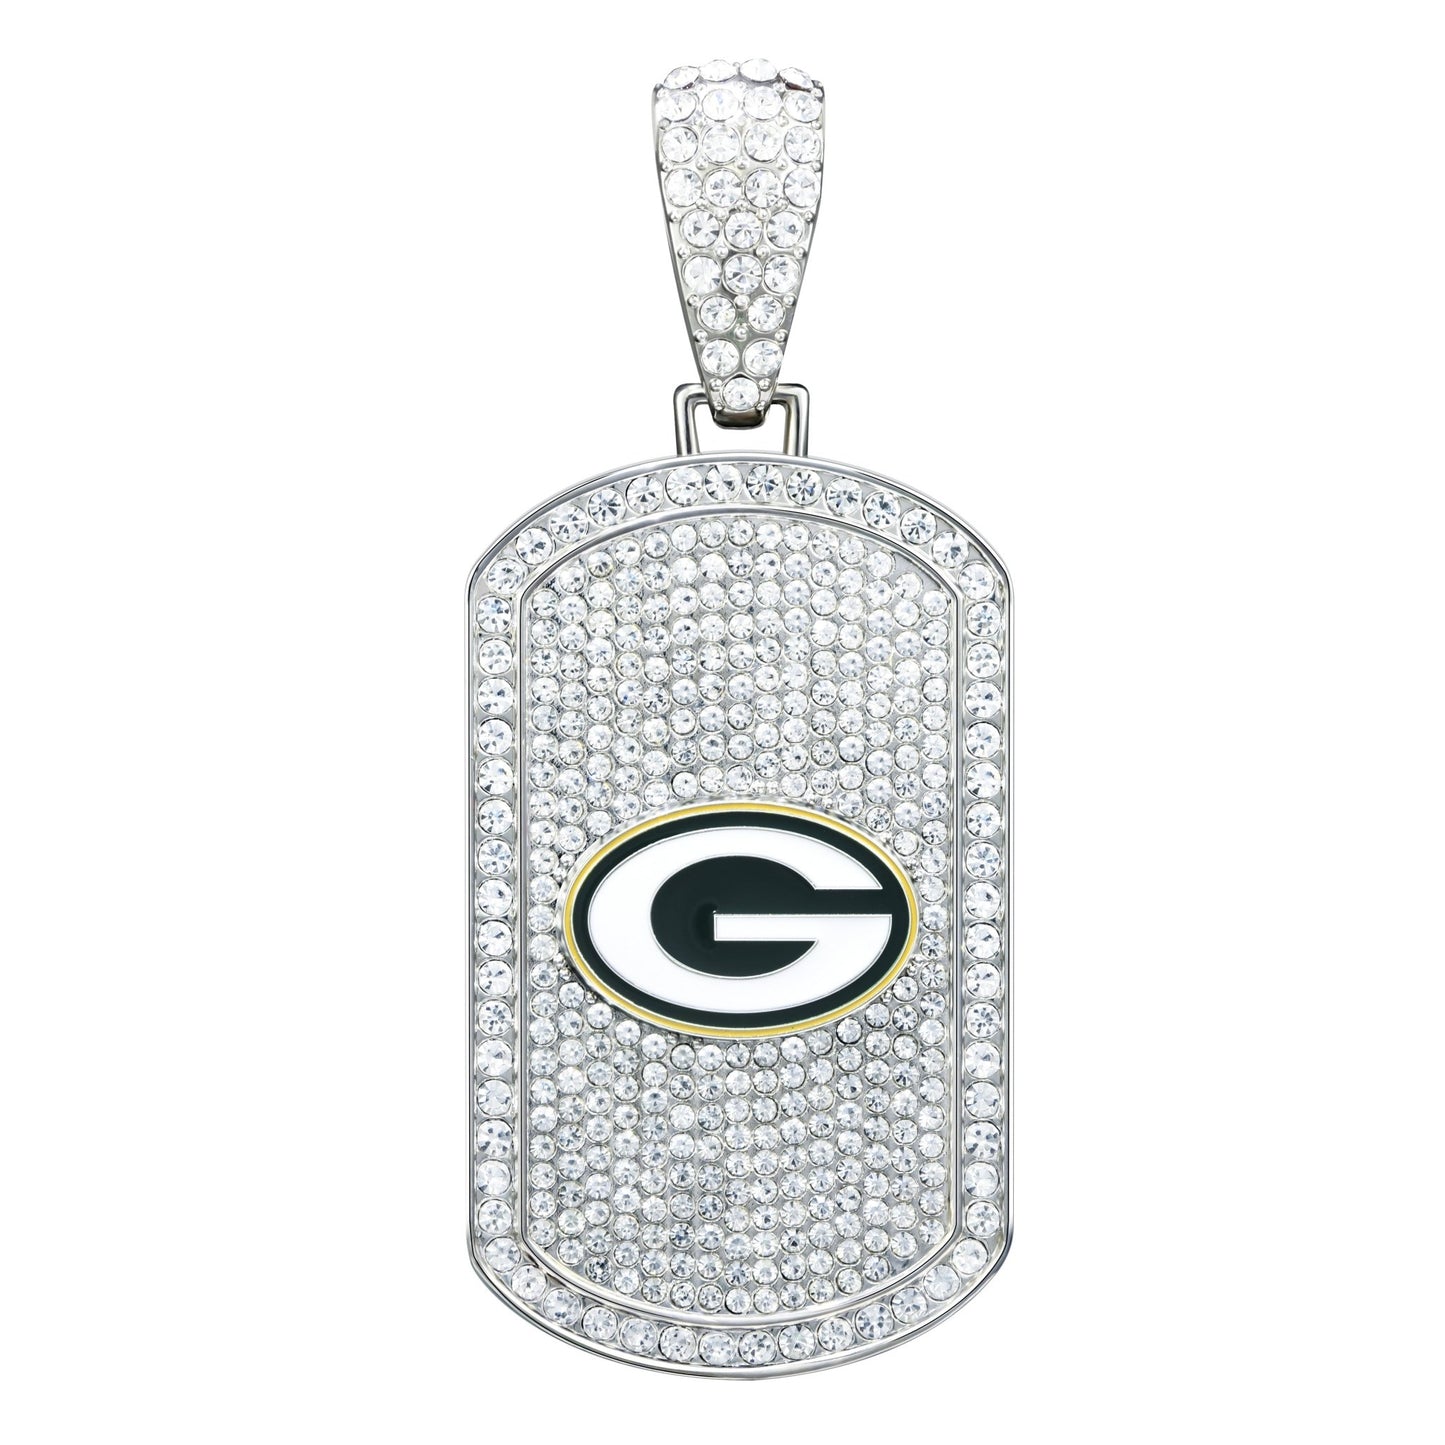 NFL Bling Dog Tag Necklace - Gamedays Gear - Green Bay Packers